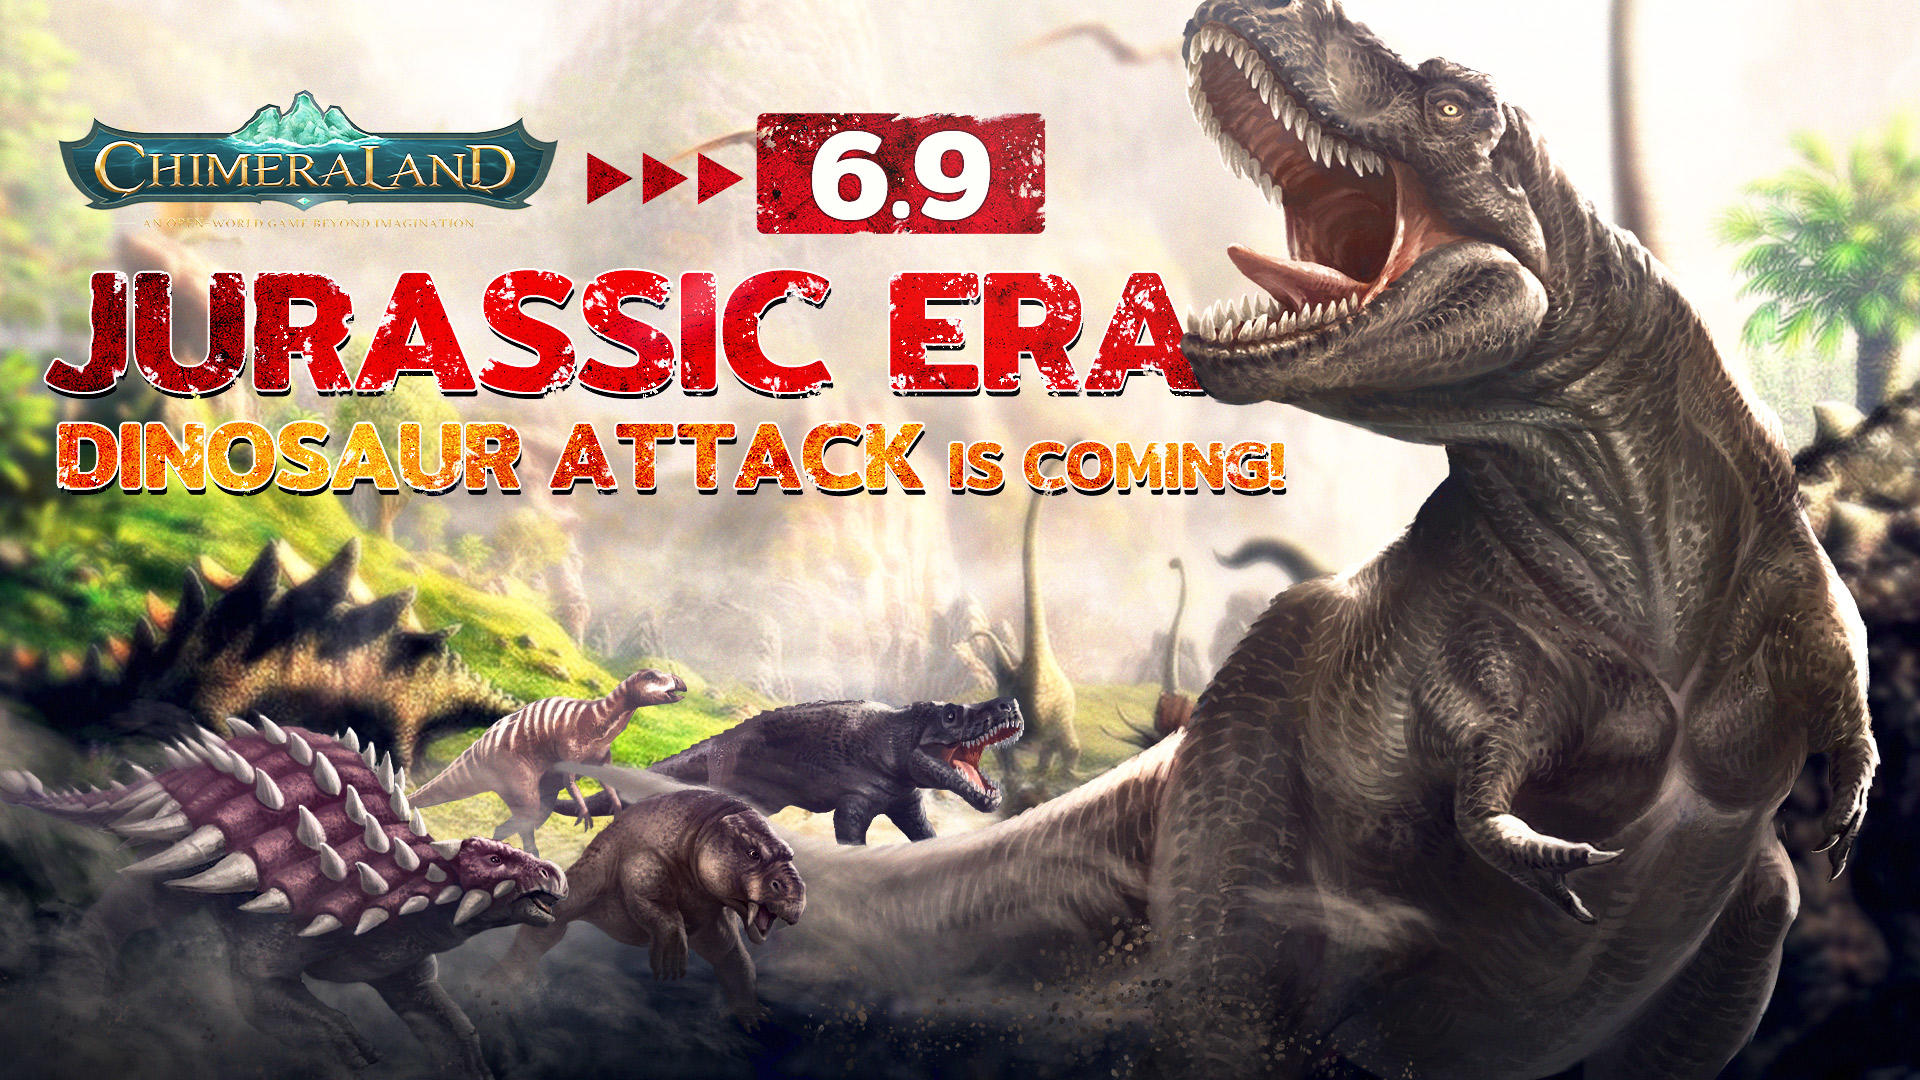 Dinosaur Theme Event Guide, IT'S DINO TIME! Jurassic dinosaurs seem to be  found in Chimeraland! Celebrate all things Dinosaur in Jurassic Era,  Chimeraland Edition! And we have, By Chimeraland - SEA